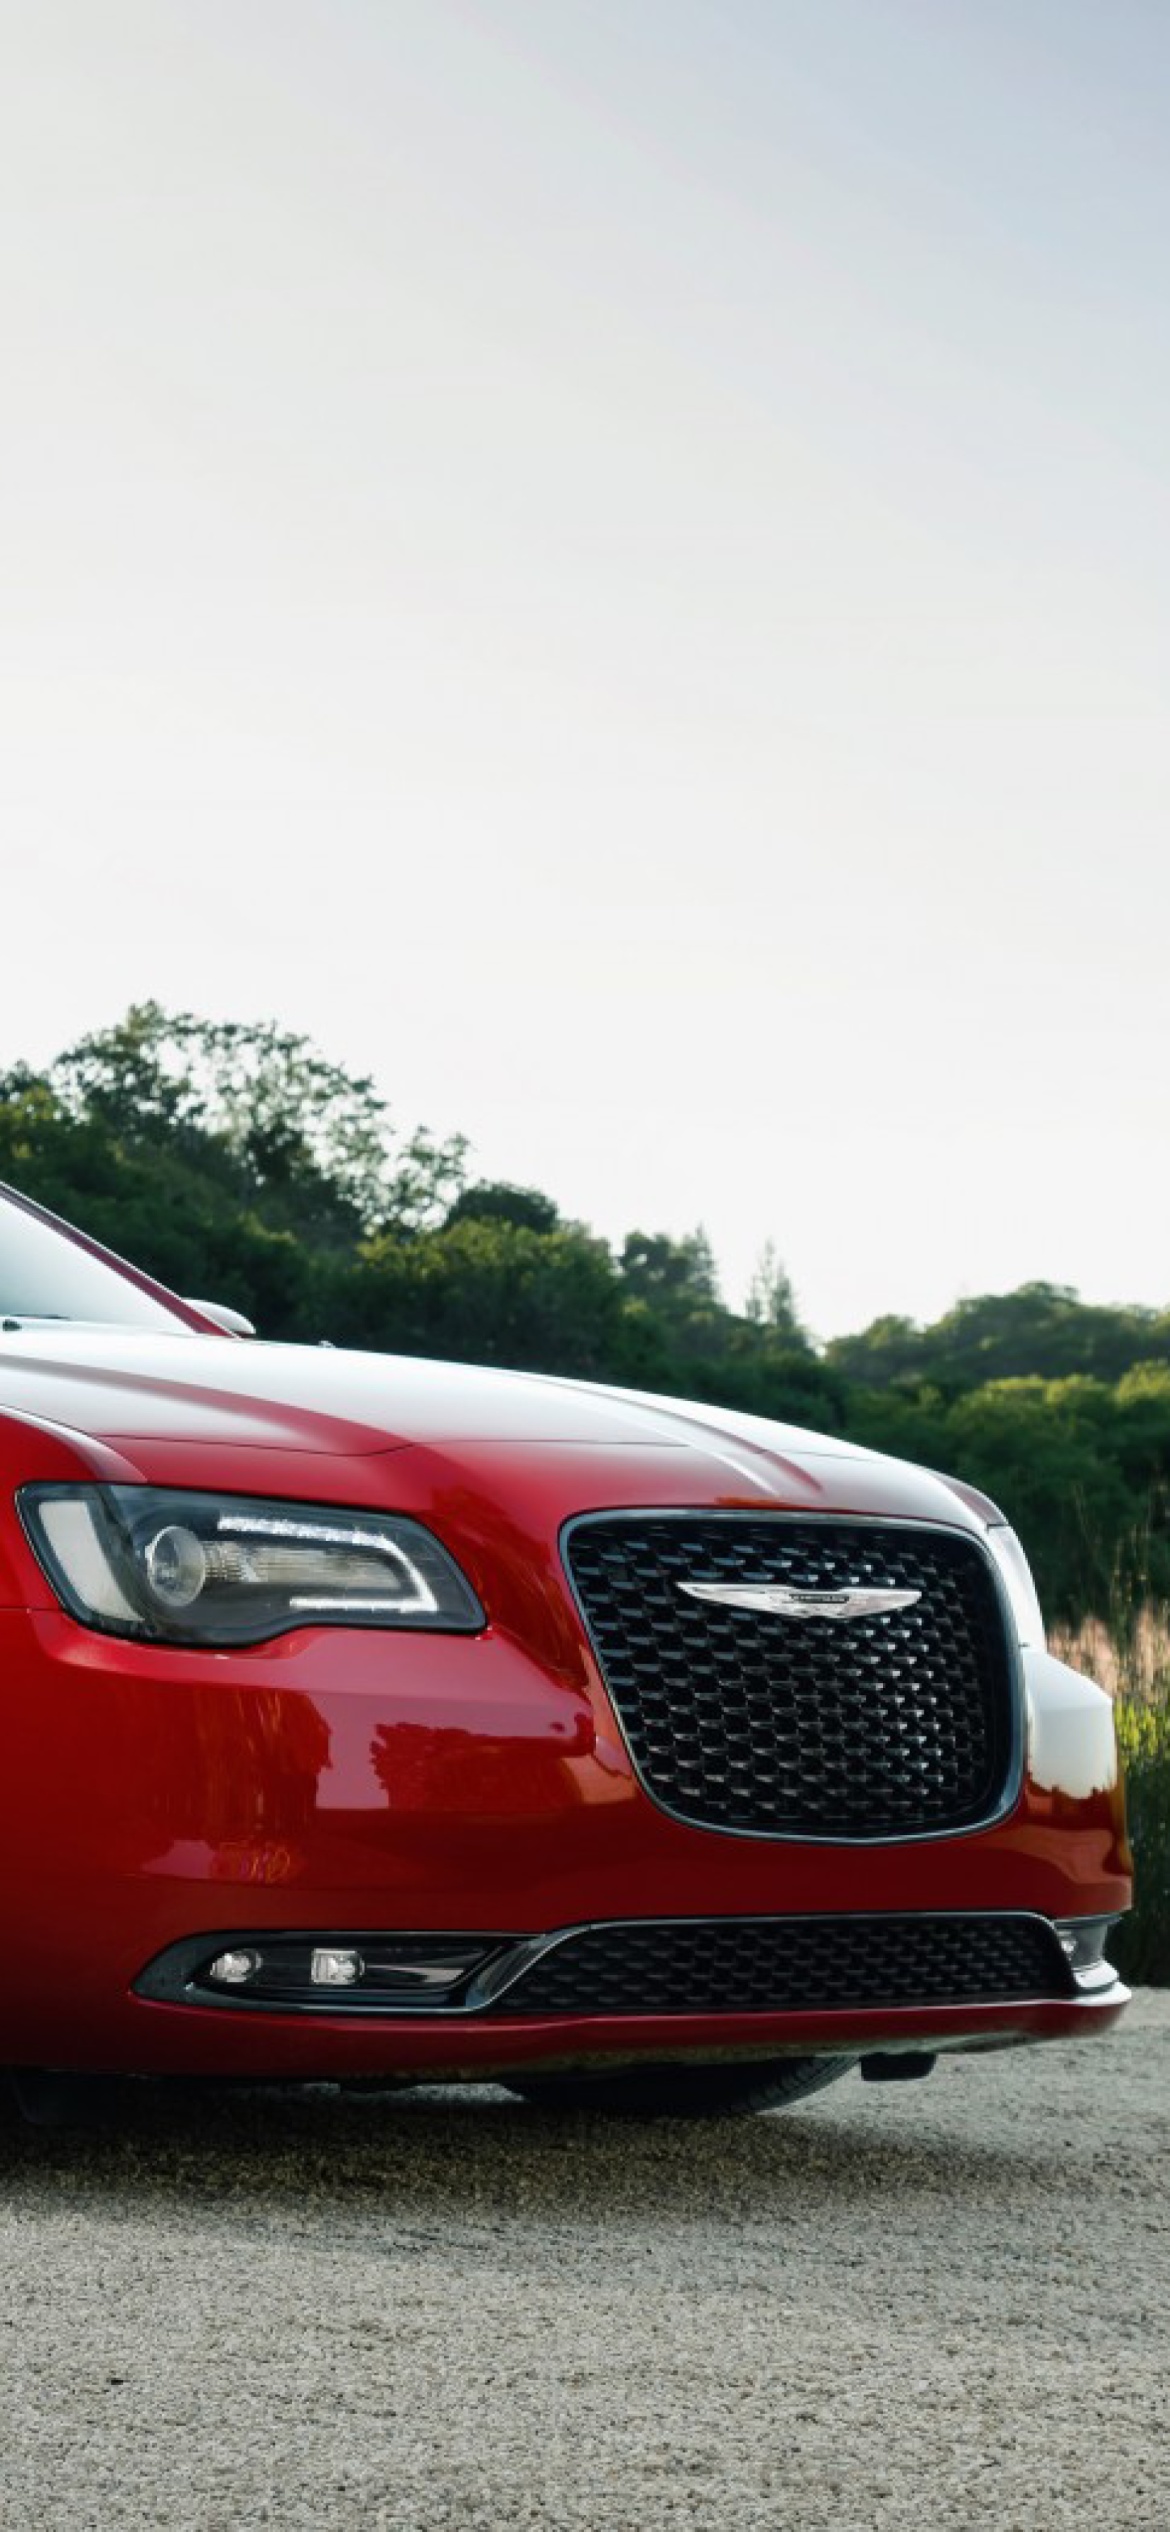 Windows Chrysler Cars Chrysler 300 picture  Download Best Free images